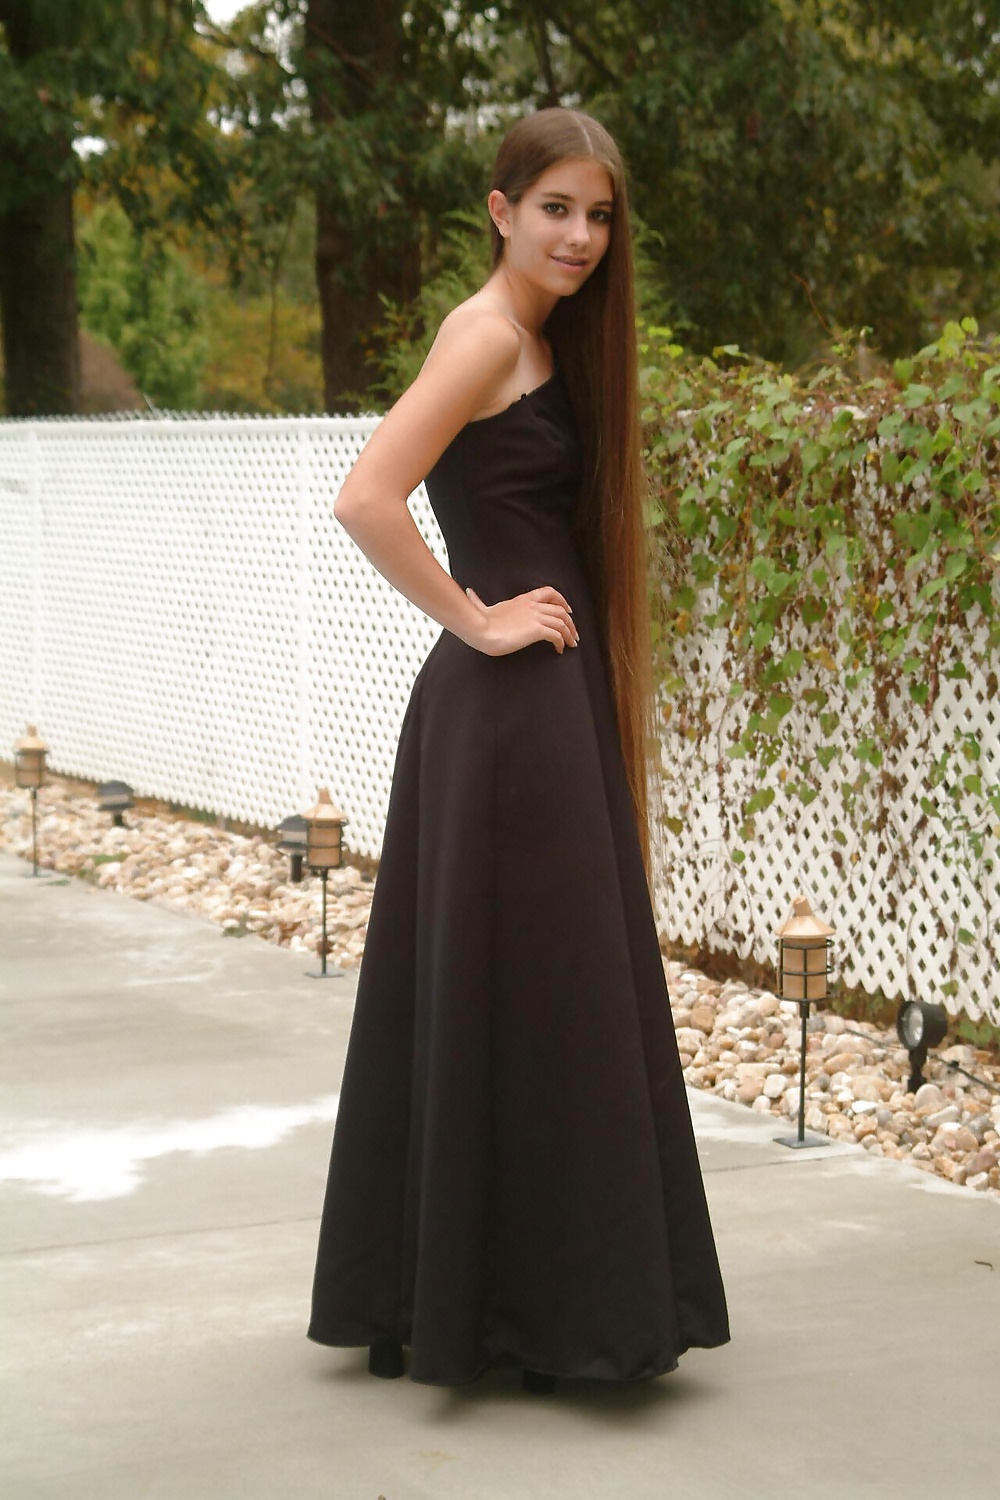 Beautiful Teen With Insanely Long Hair - 03 #27180478